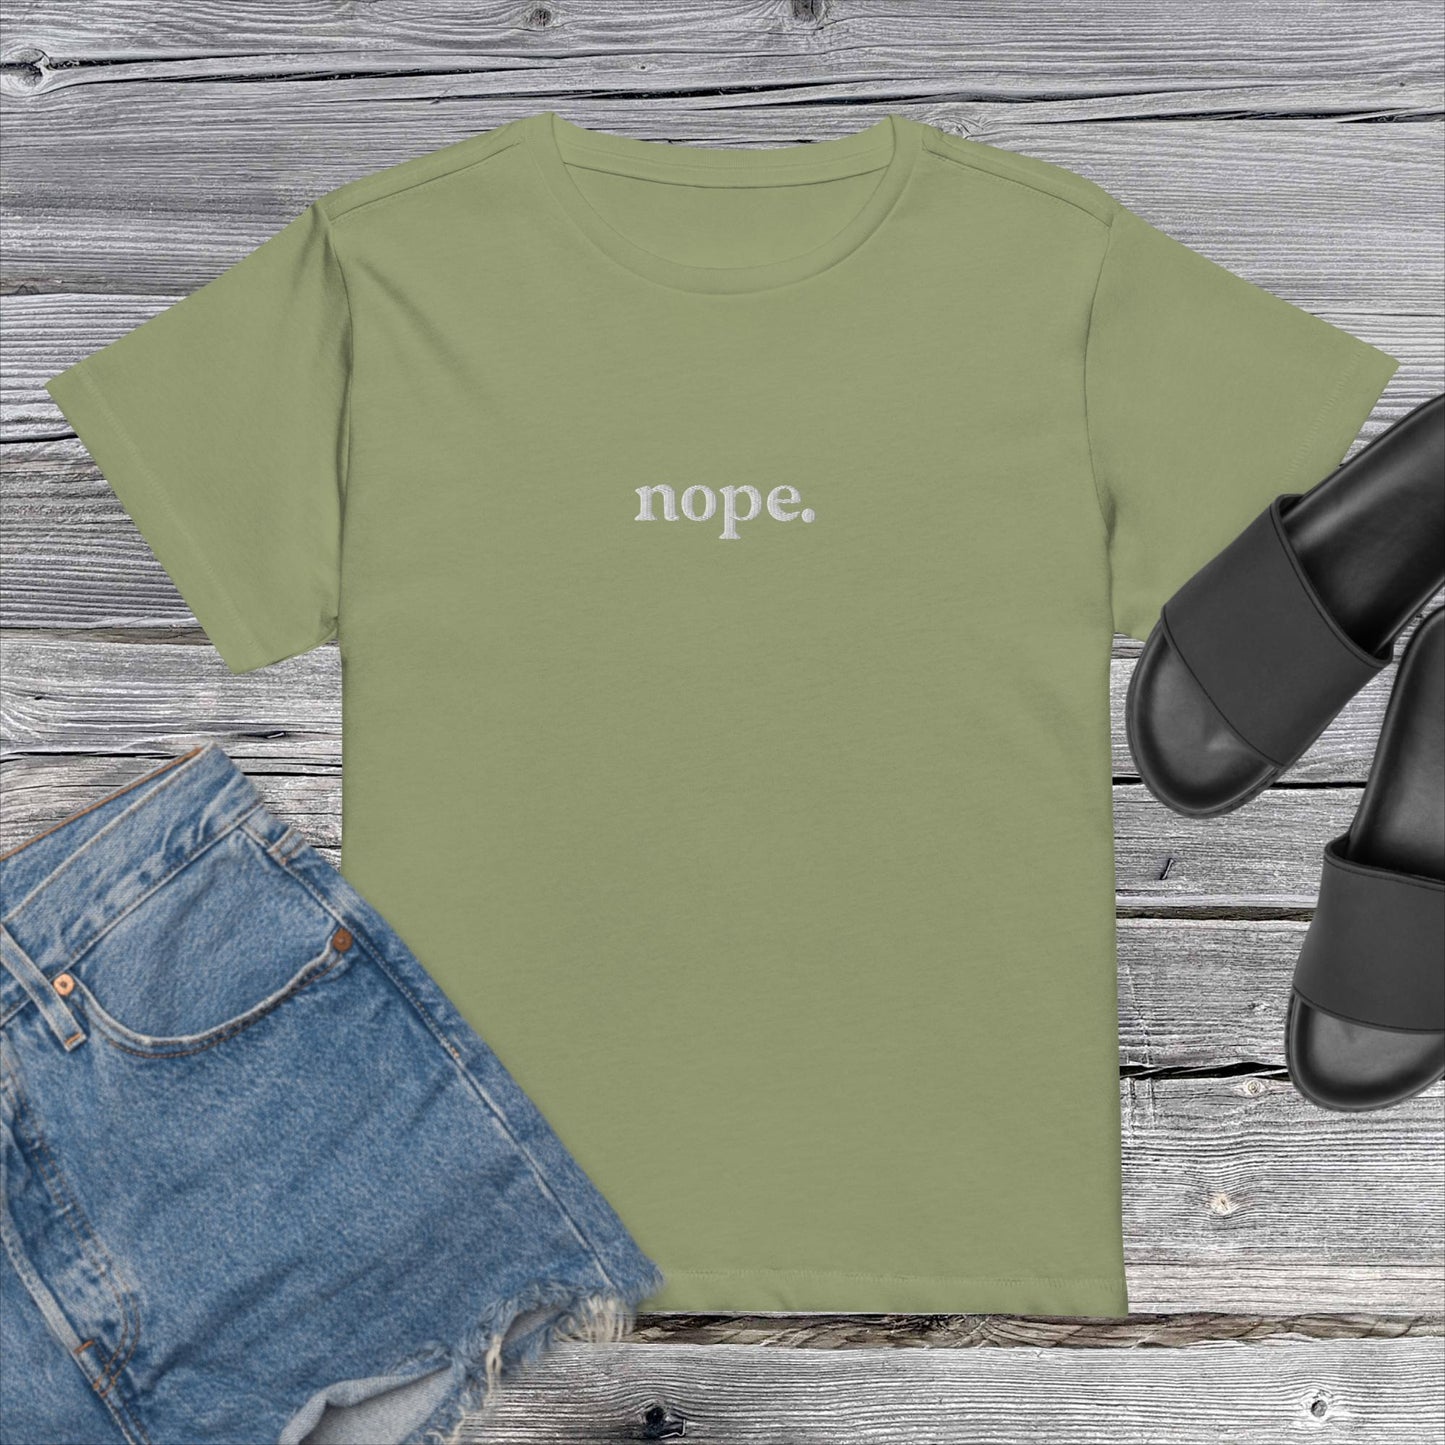 Nope Embroidered Women’s High-Waisted T-Shirt